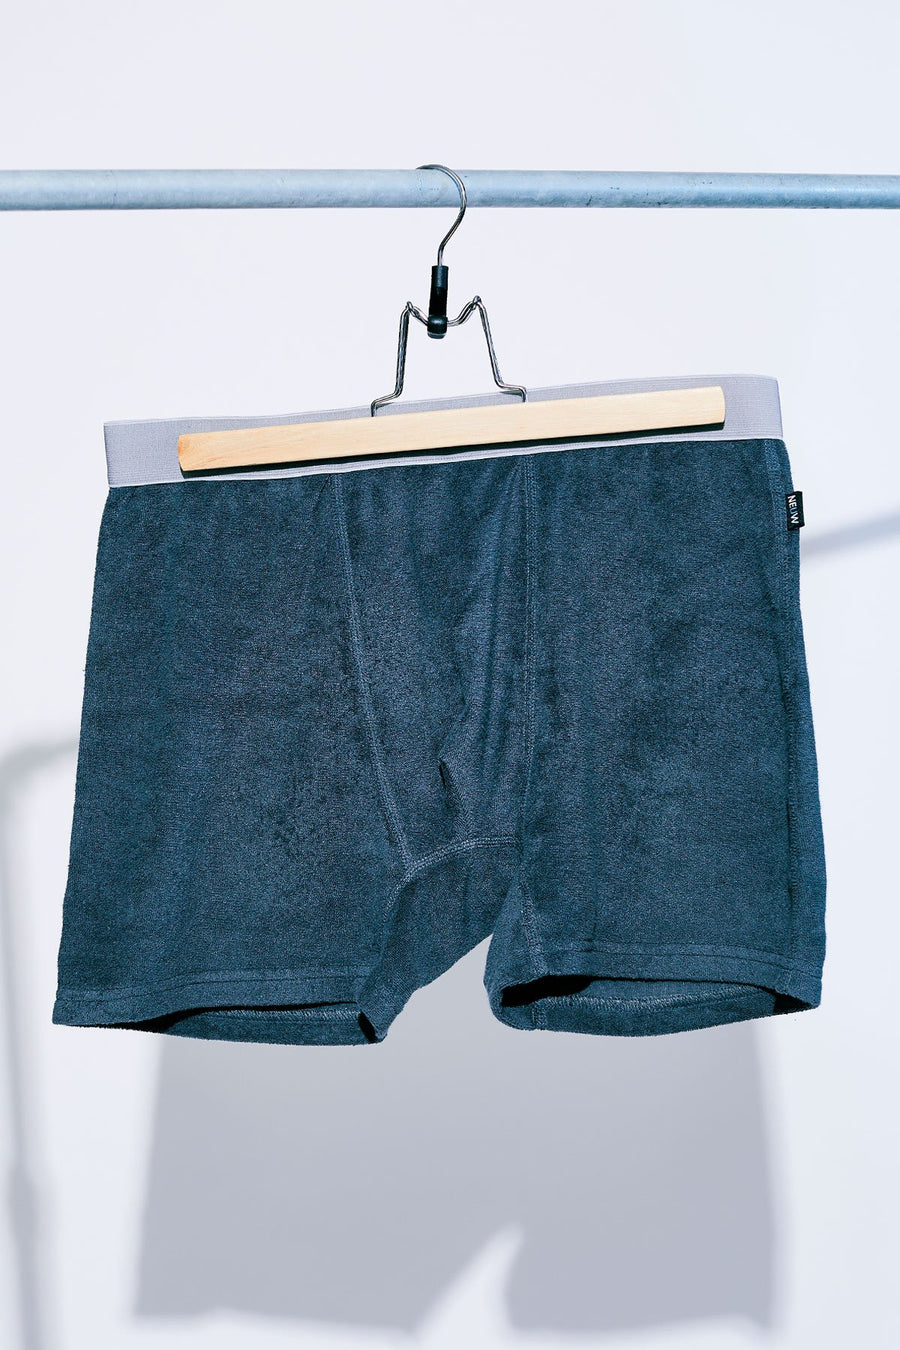 Relux Wear Boxer（Pile）Chacoal Gray